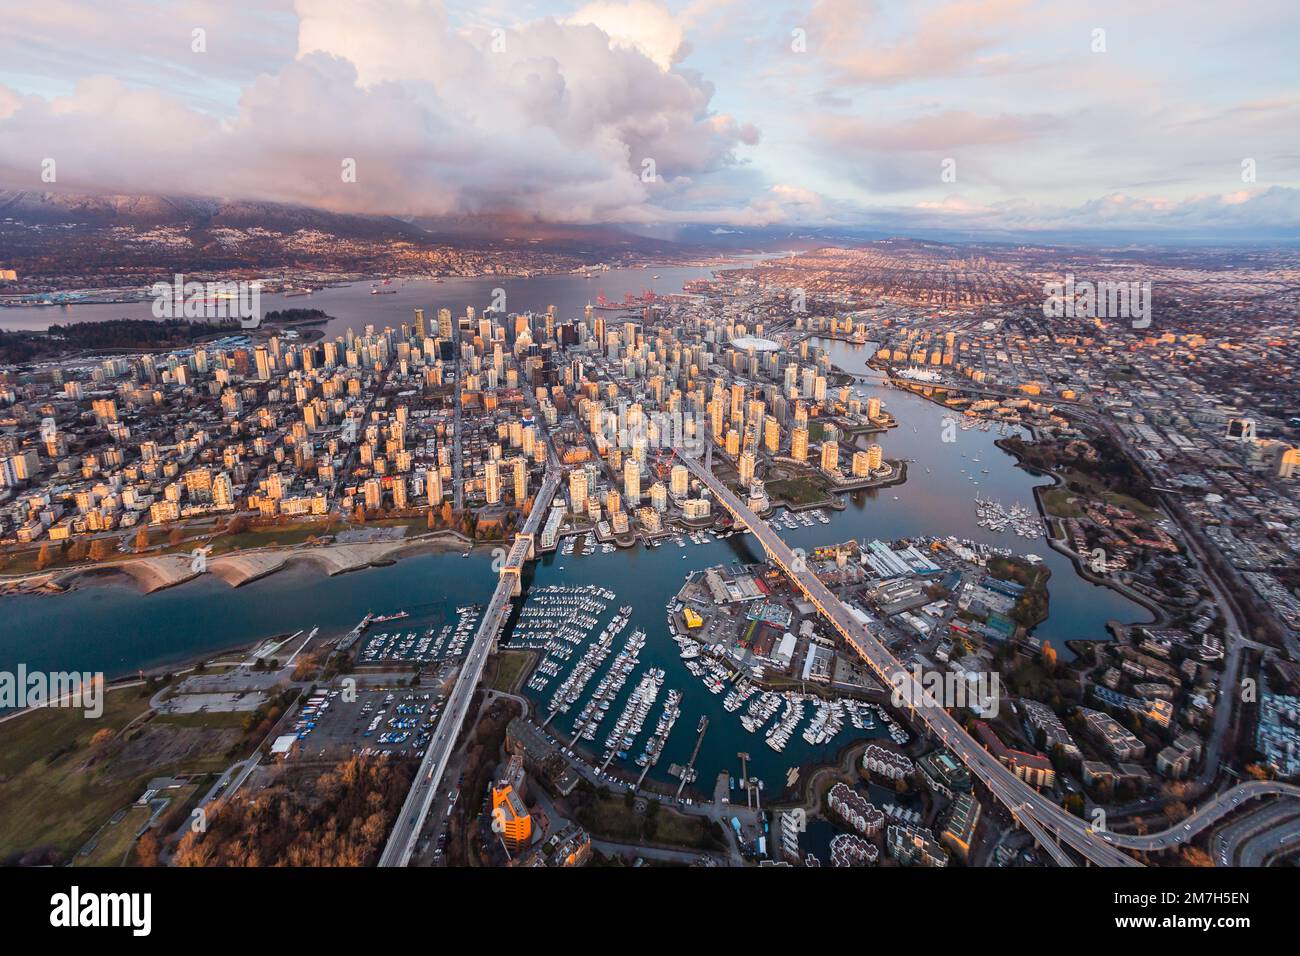 False Creek Downtown Vancouver Sunset Skyline Aerial Photo Wide Foto Stock